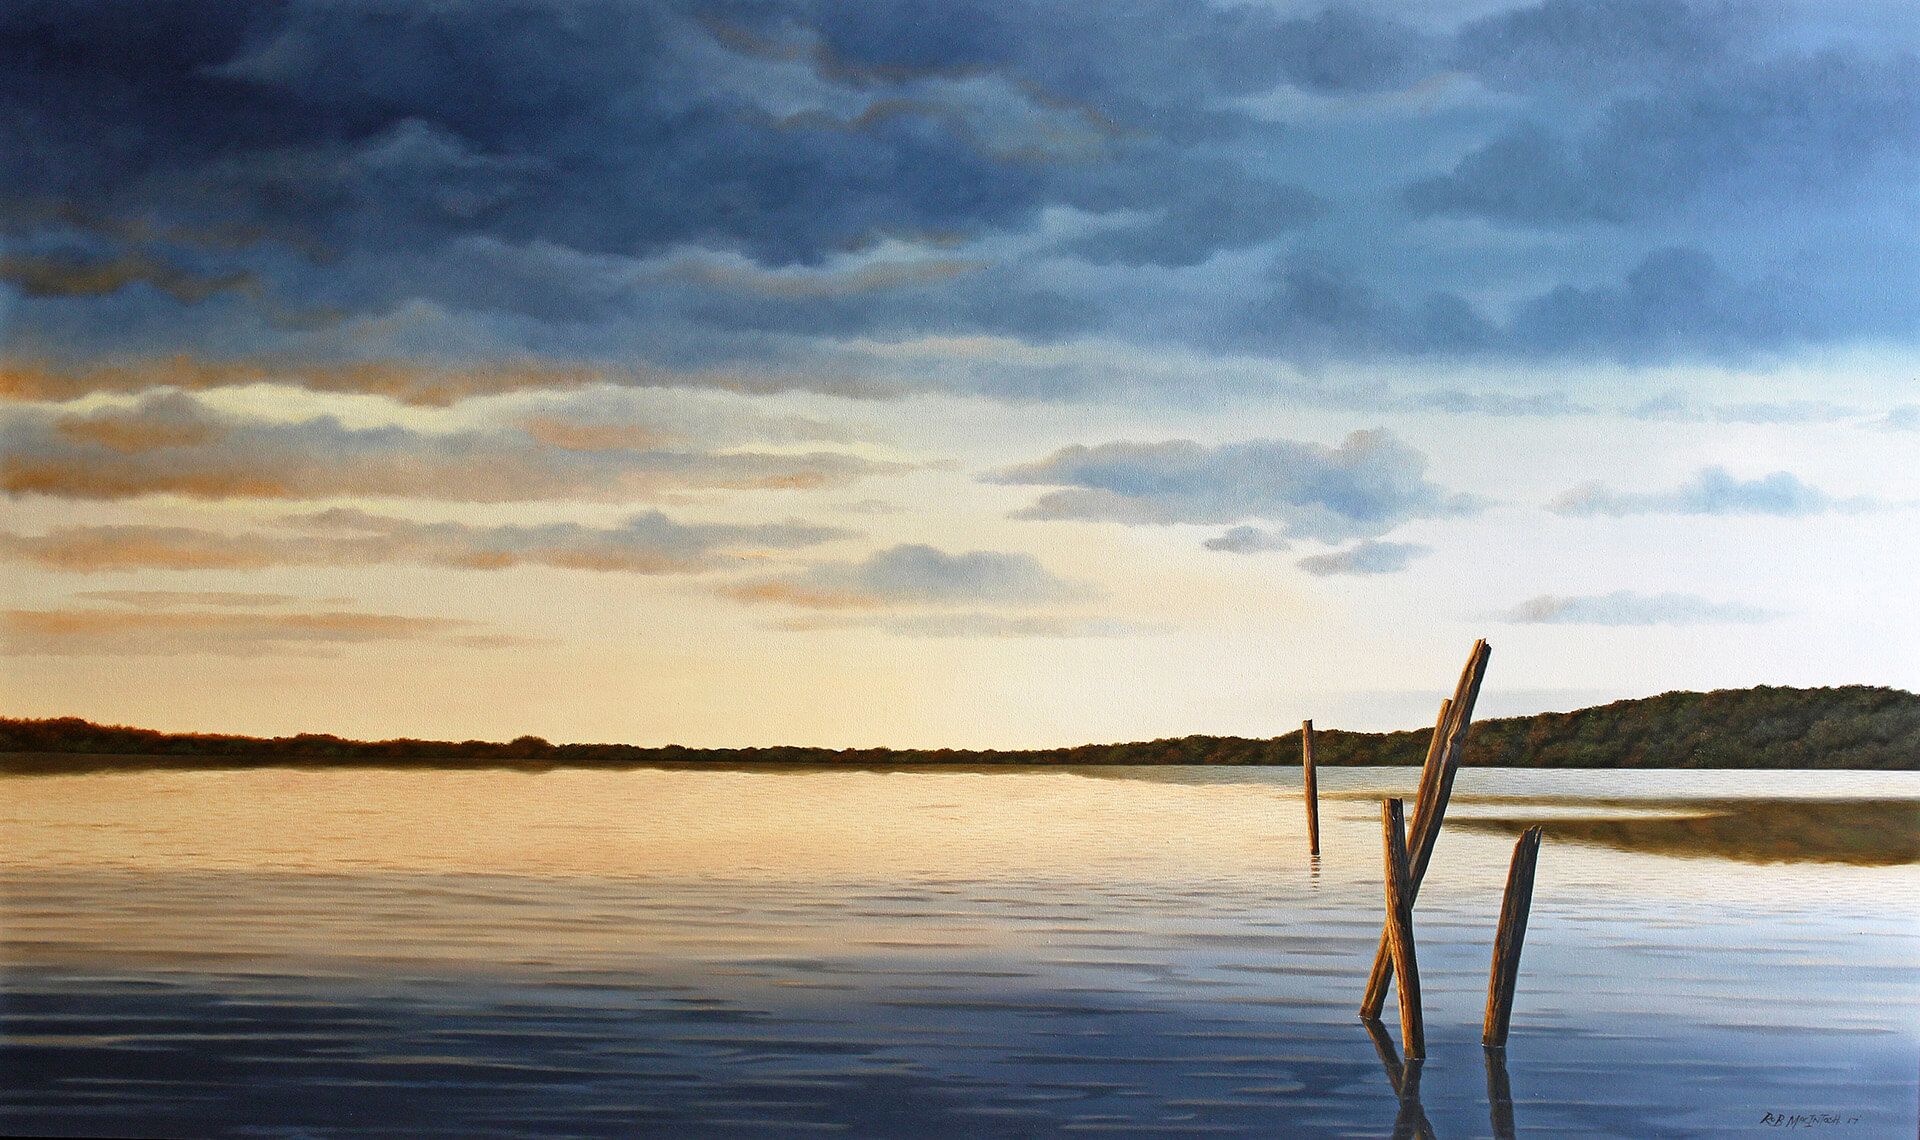 Photorealistic painting of a cloudy sunset over a calm ocean